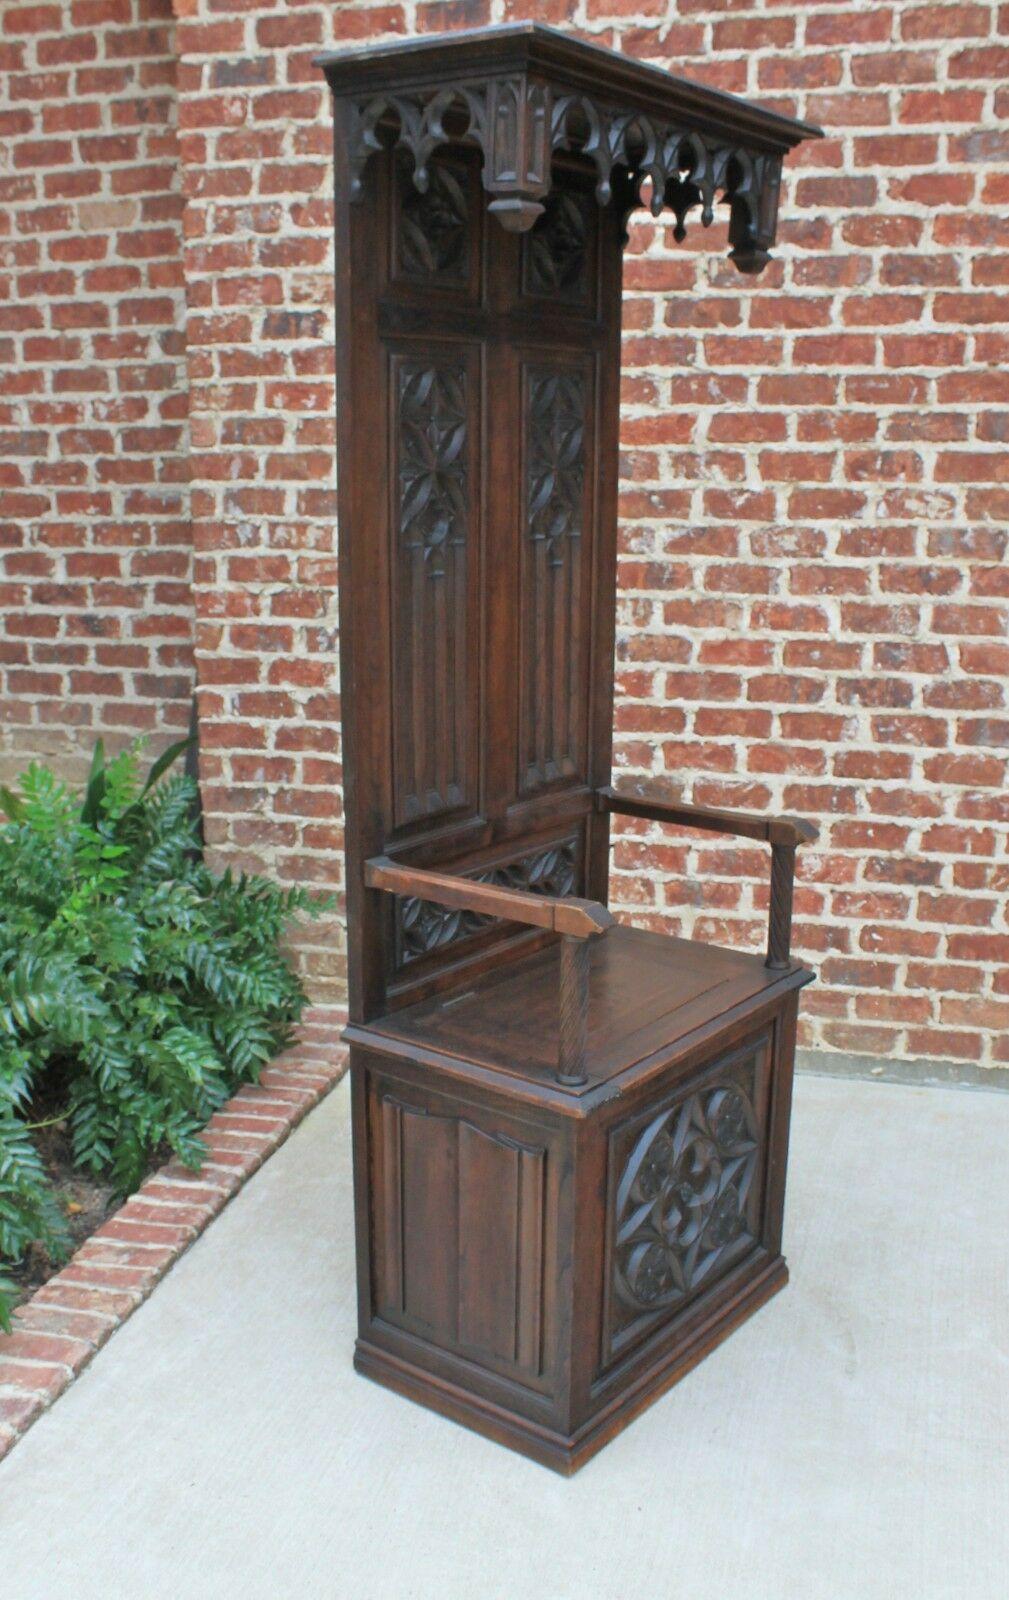 Antique French Carved Oak Hall Seat Monk's Bench Throne Chair Canopy Tall 19th C 1